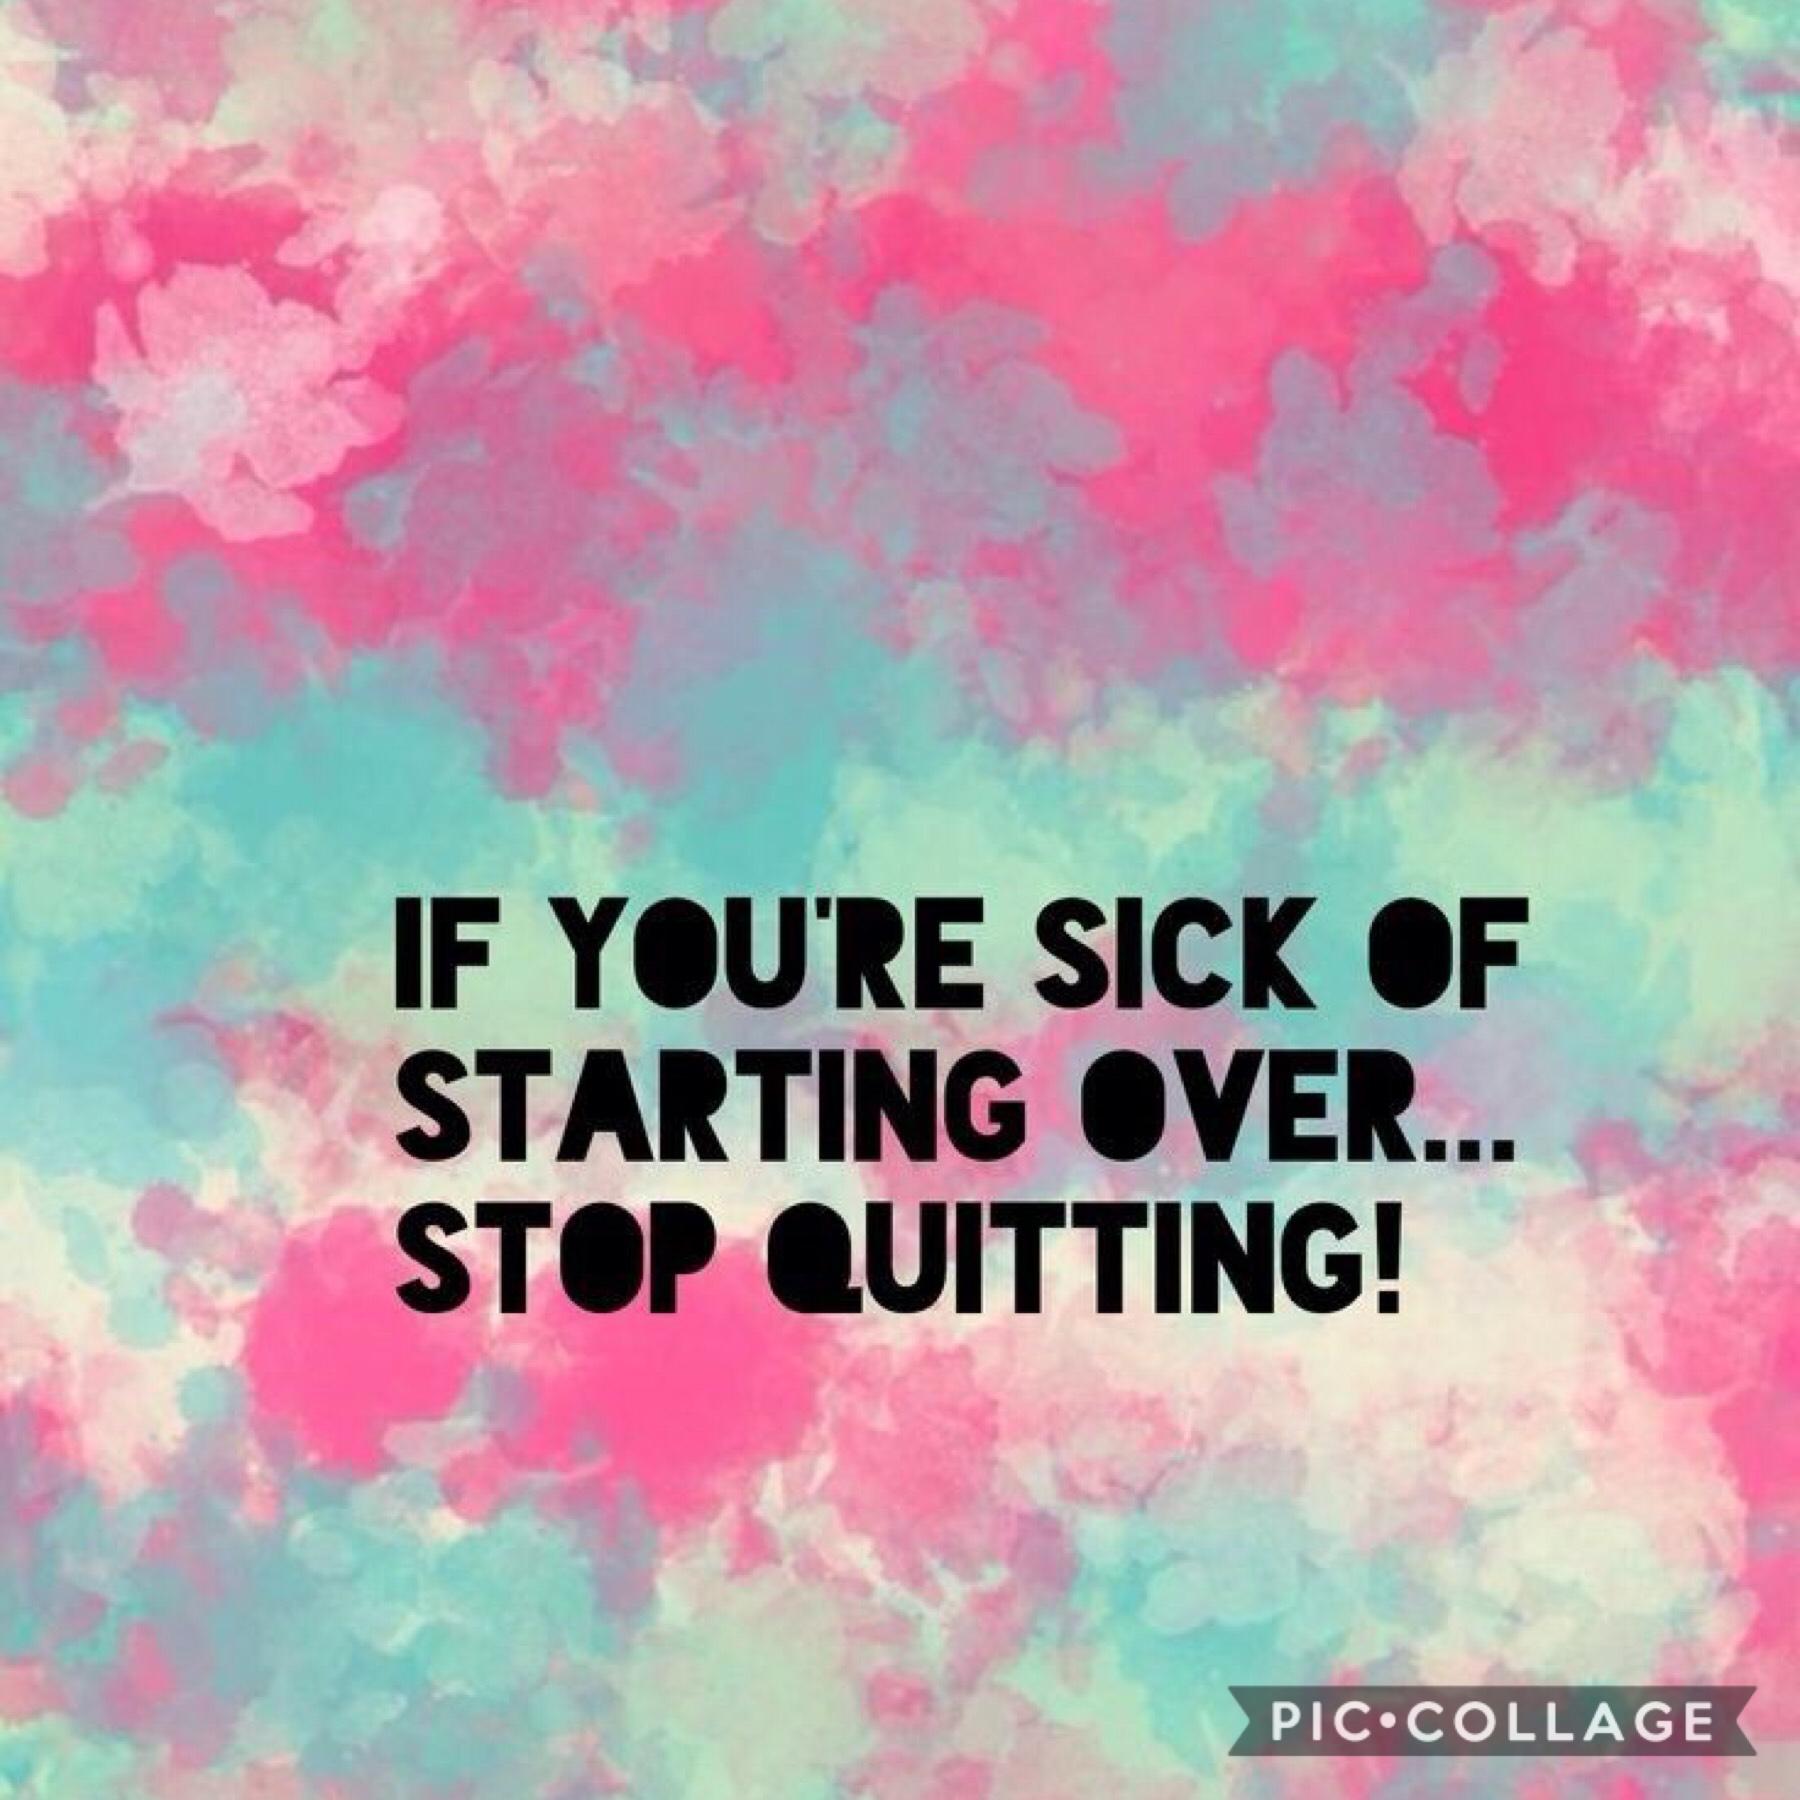 Don’t be a quitter 
Be successful 
Because you know you can be x